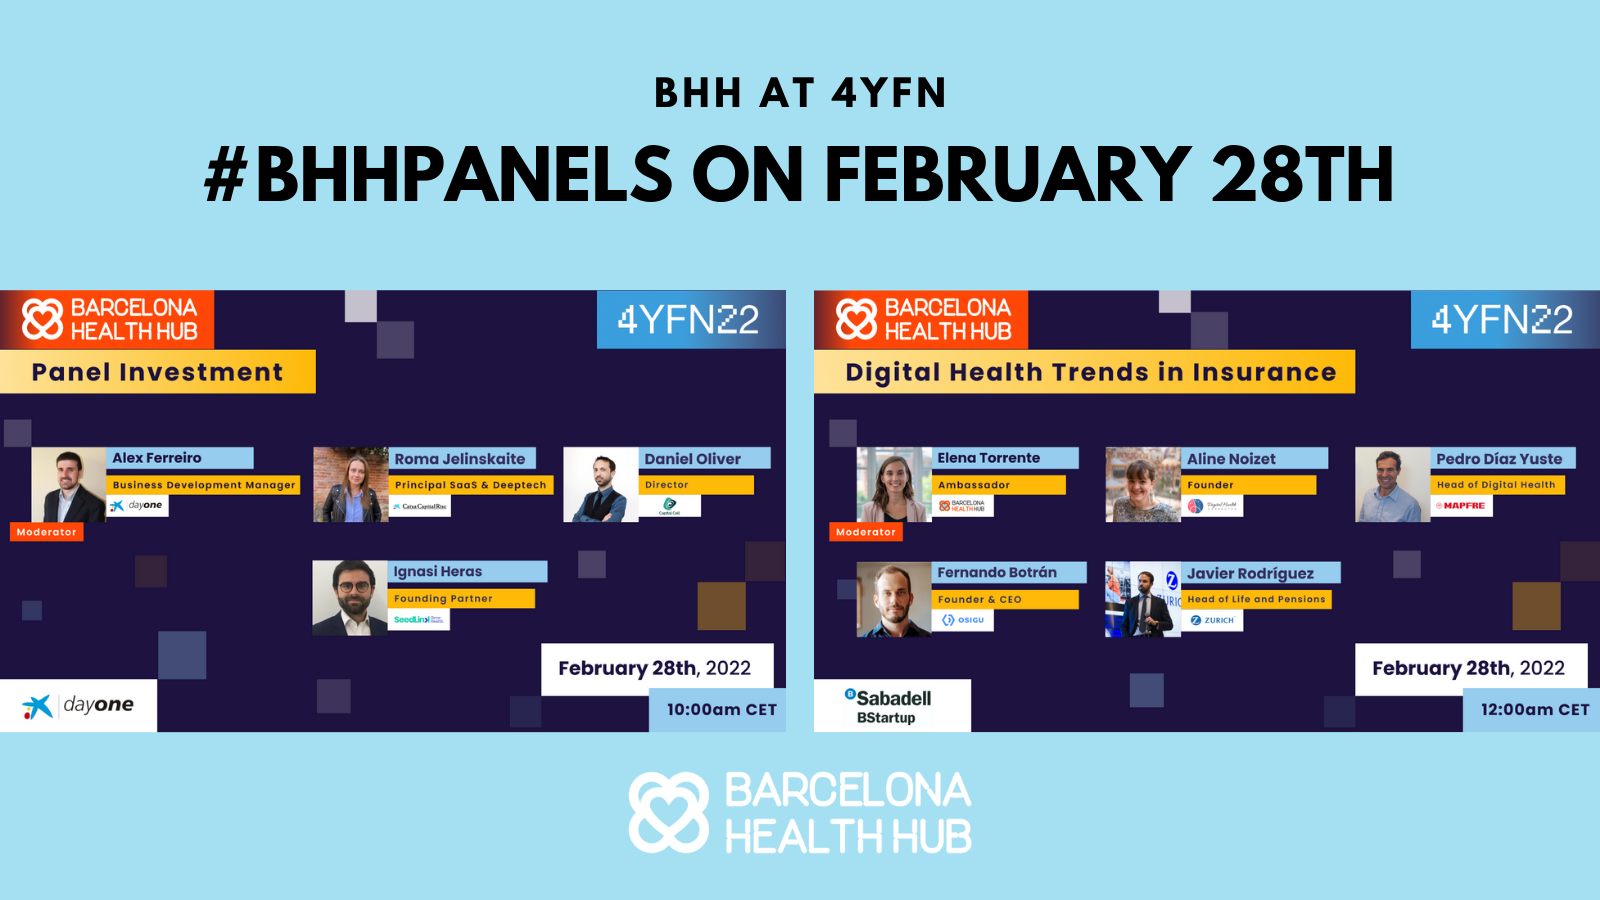 #BHHPanels at 4YFN – Check out the panels on Monday February 28th!